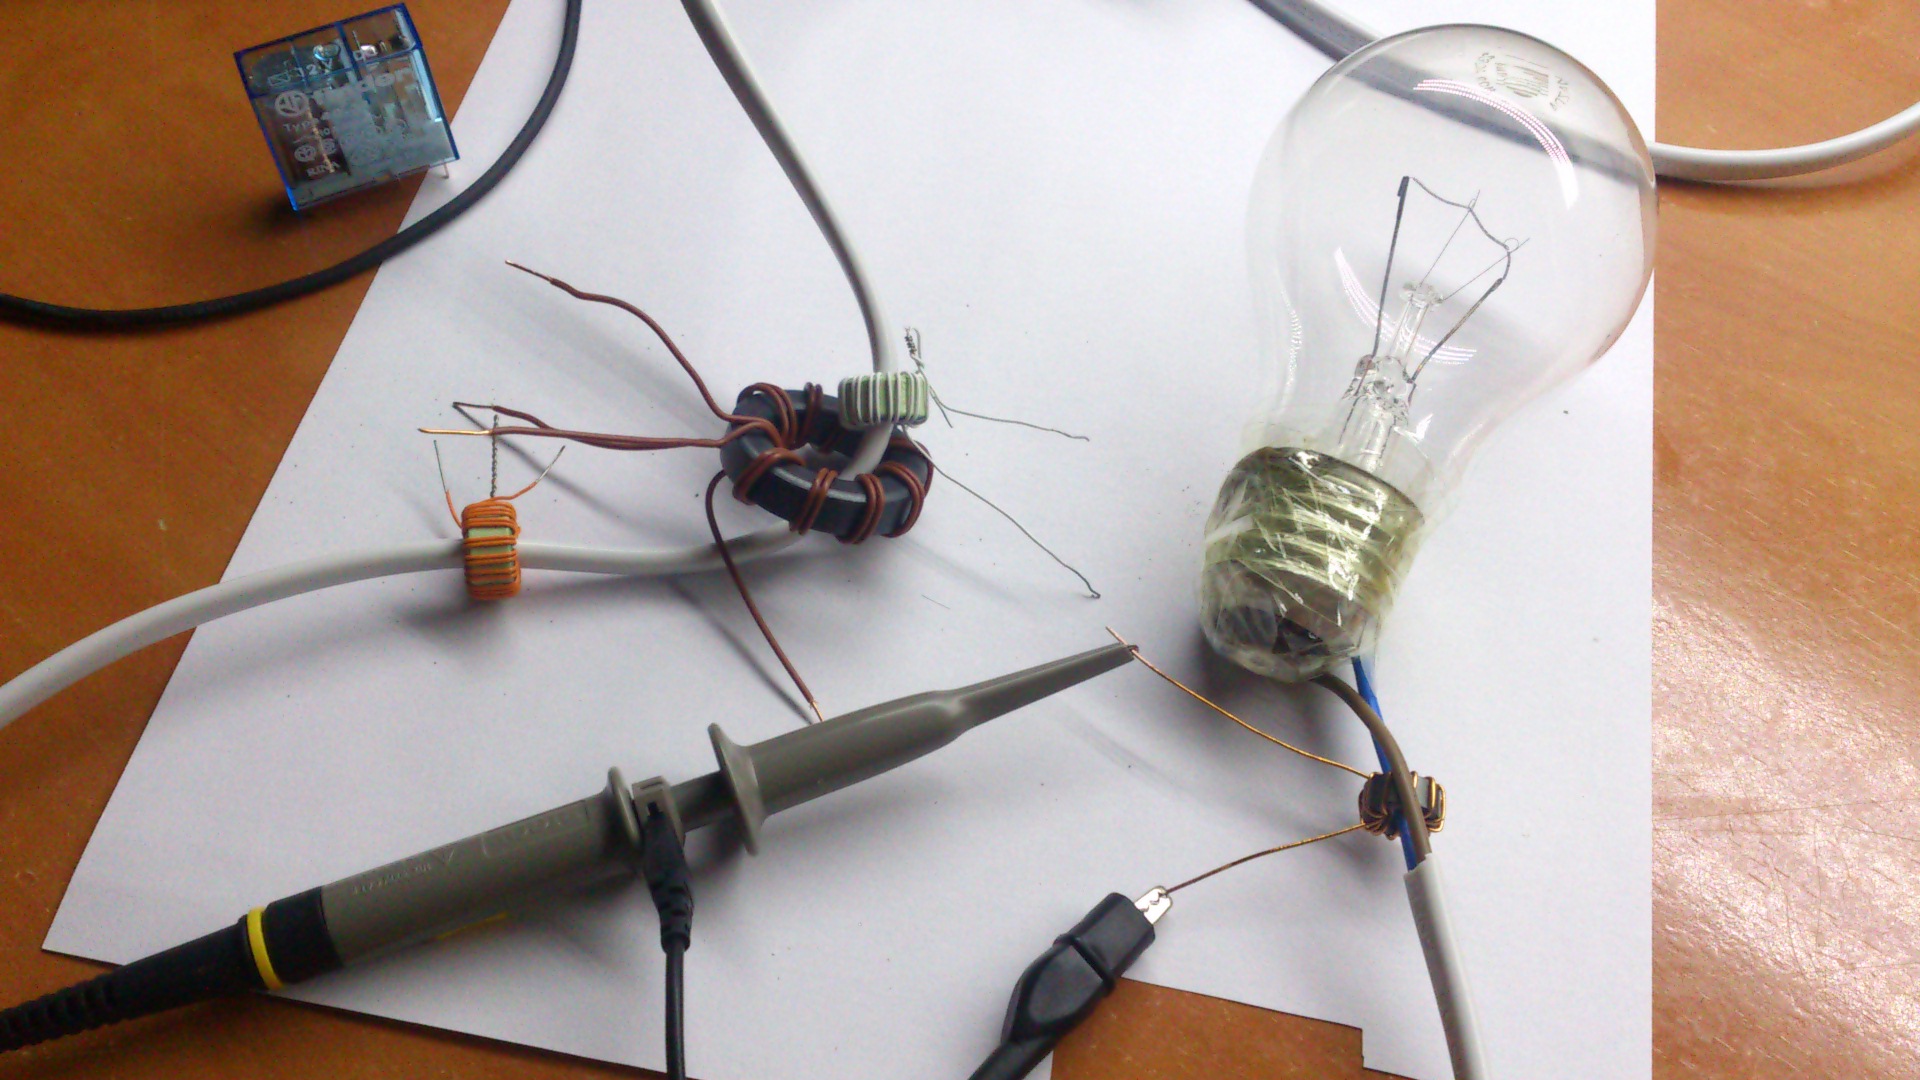 /diy/ - Do-It-Yourself How Many Amps Does A 60w Bulb Use